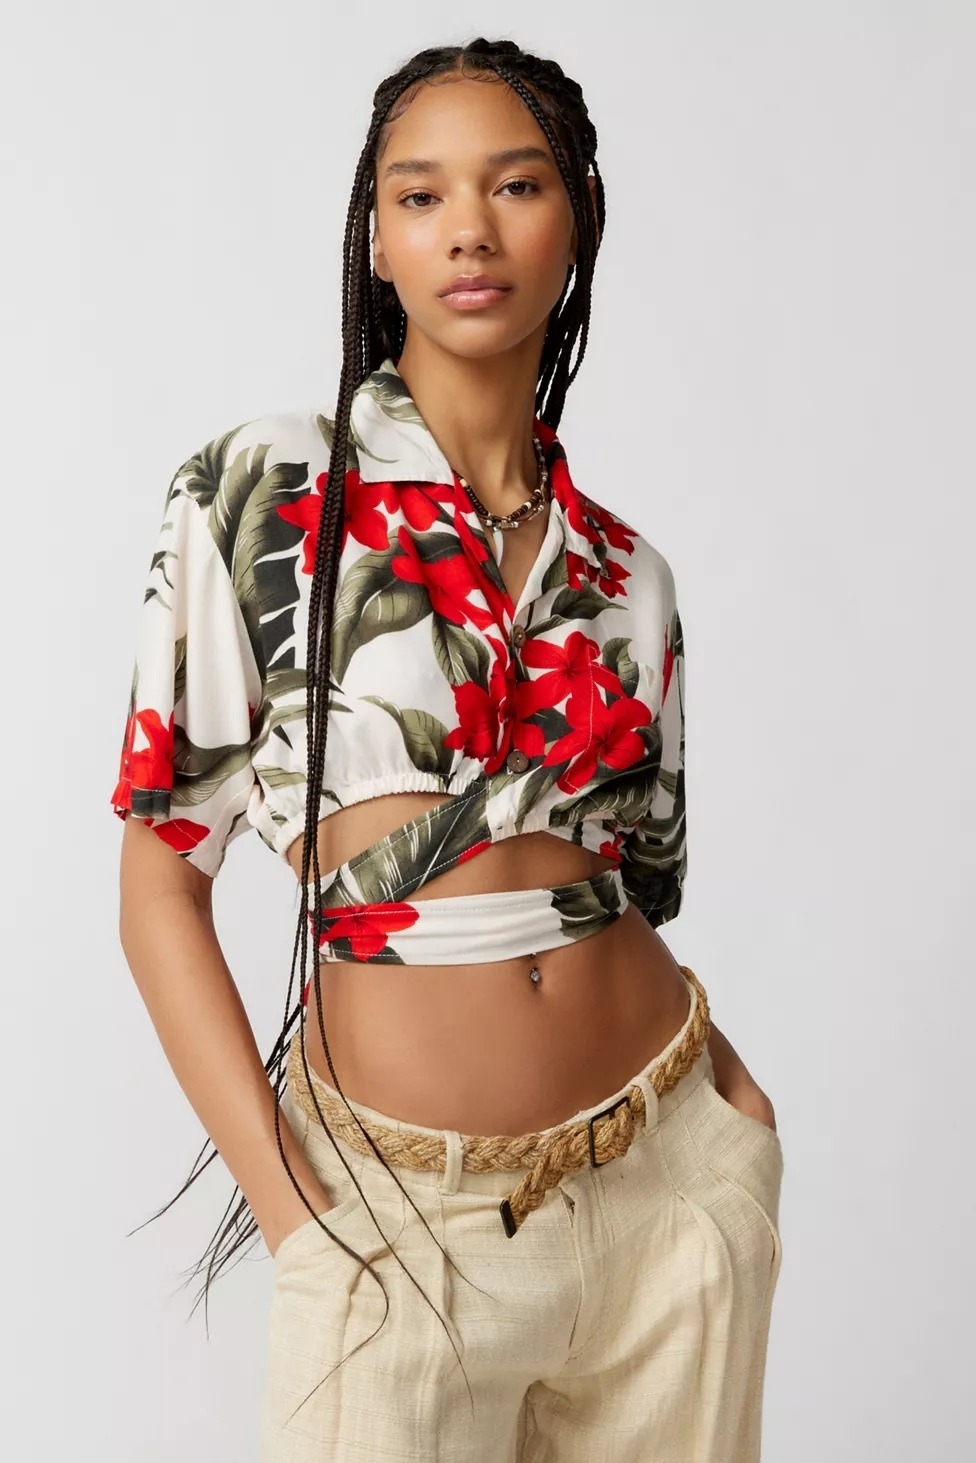 Model wearing wrap top with red and green tropical floral print